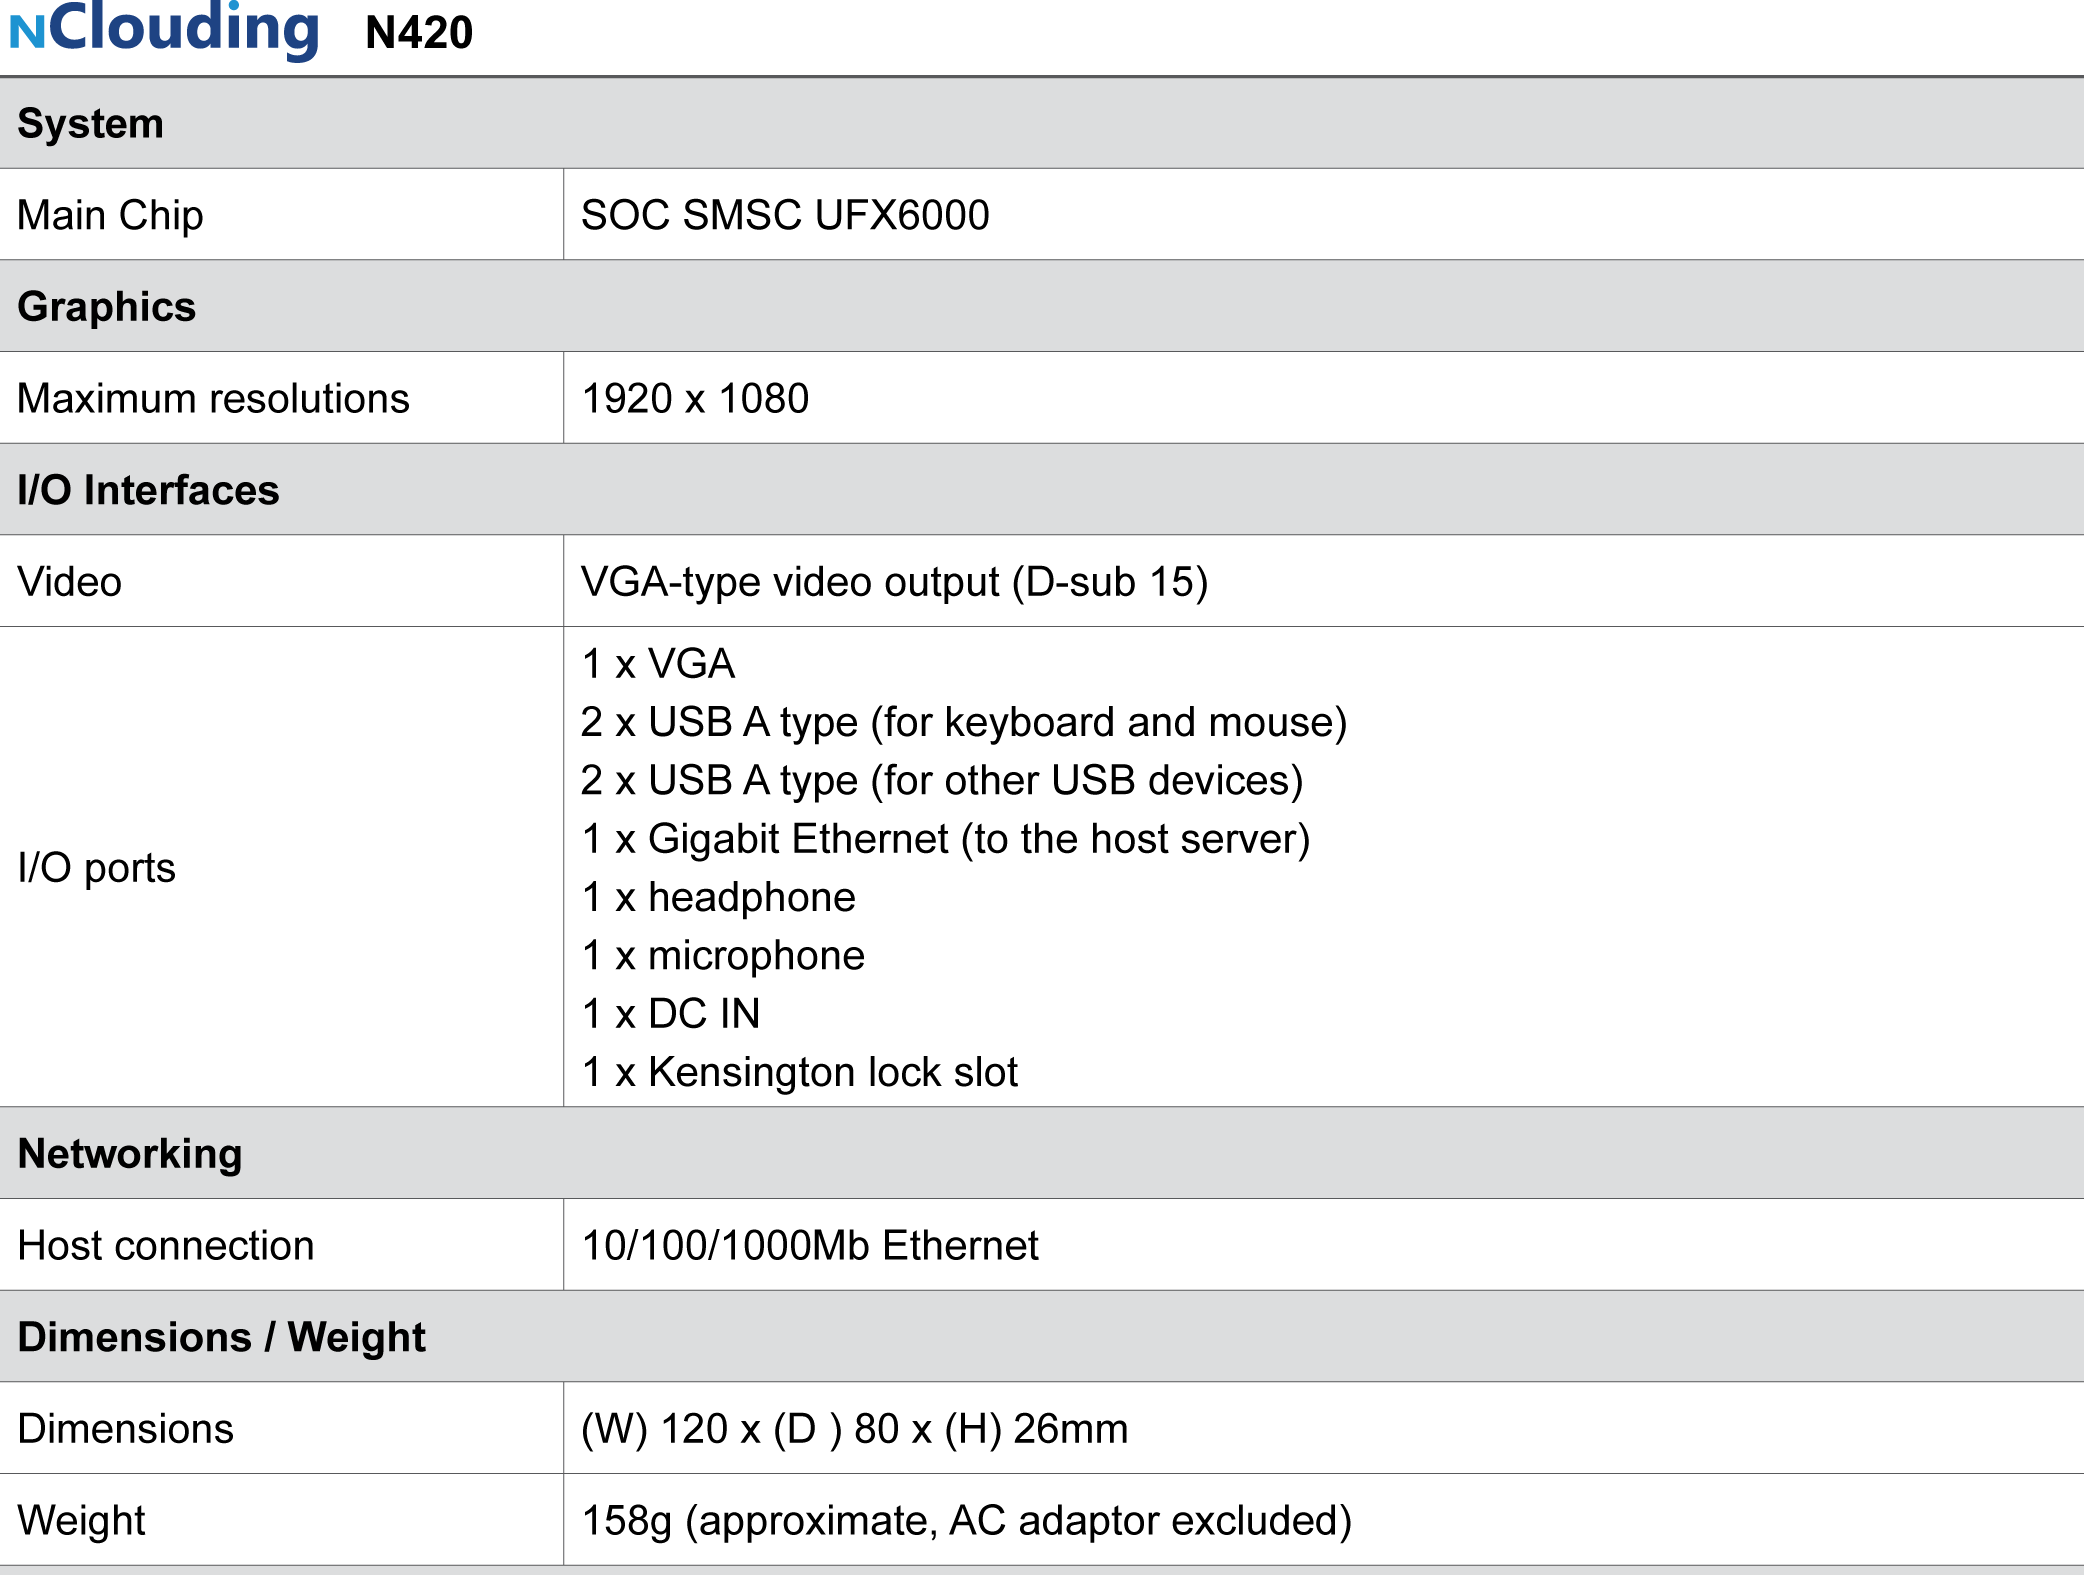 N420 Specifications (1) Copyright 2014 NClouding